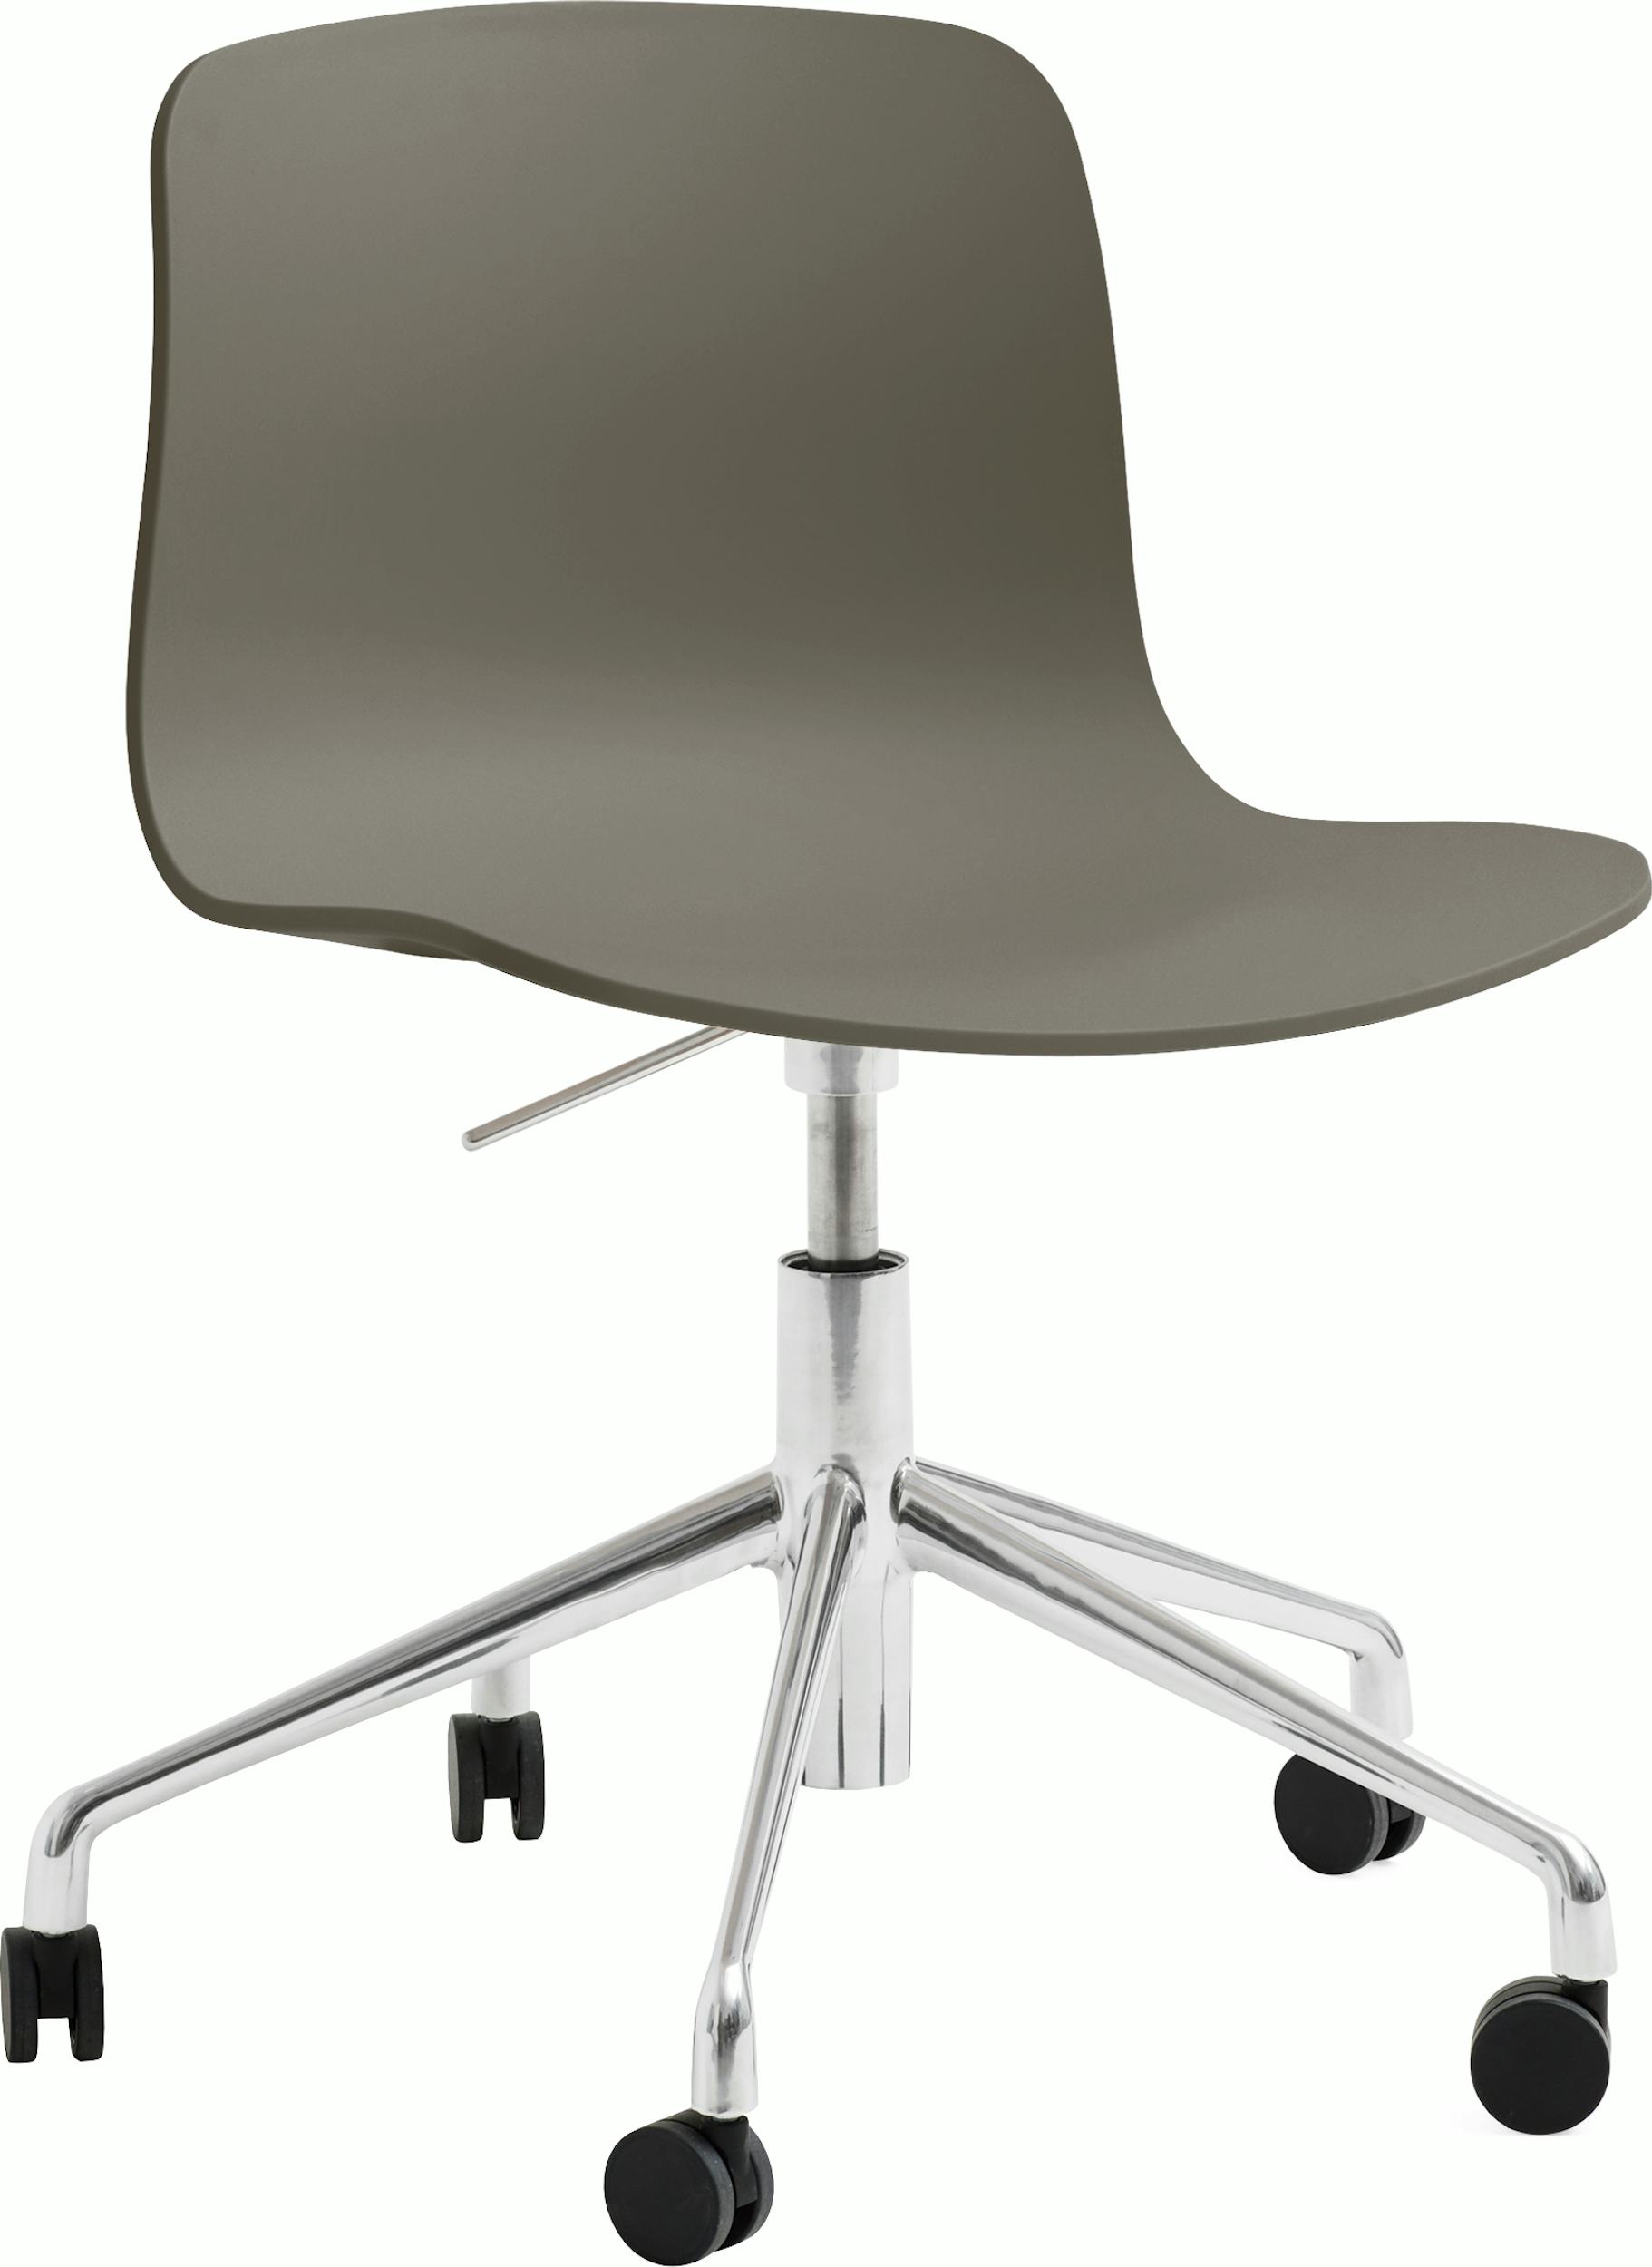 About A Chair 50 Task Chair 2.0 in Khaki | Recycled Plastic